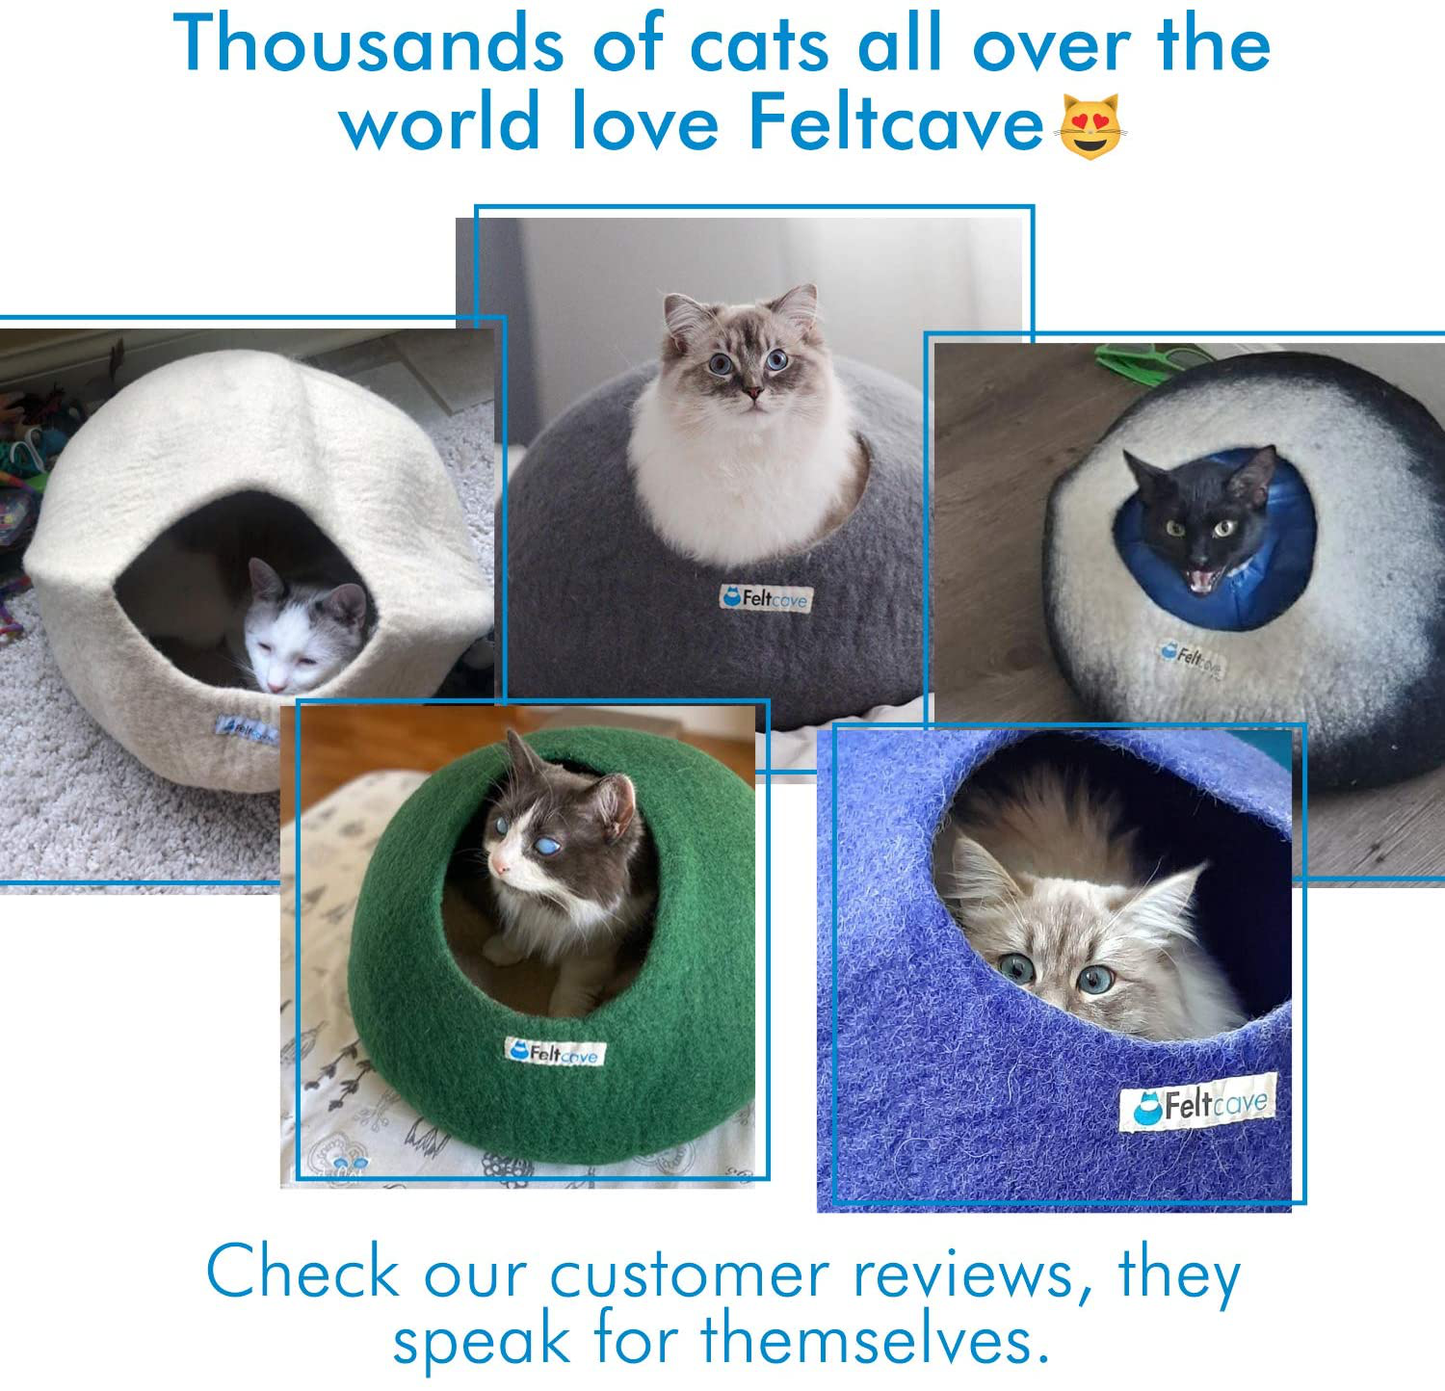 Feltcave Cat Cave Bed, Handmade Covered Cat Bed Cave, Wooly Cave for Cats, Dome Shaped Cat Pod, Cat Beds & Furniture, Felt Cat Beds for Indoor Cats Animals & Pet Supplies > Pet Supplies > Cat Supplies > Cat Beds Feltcave   